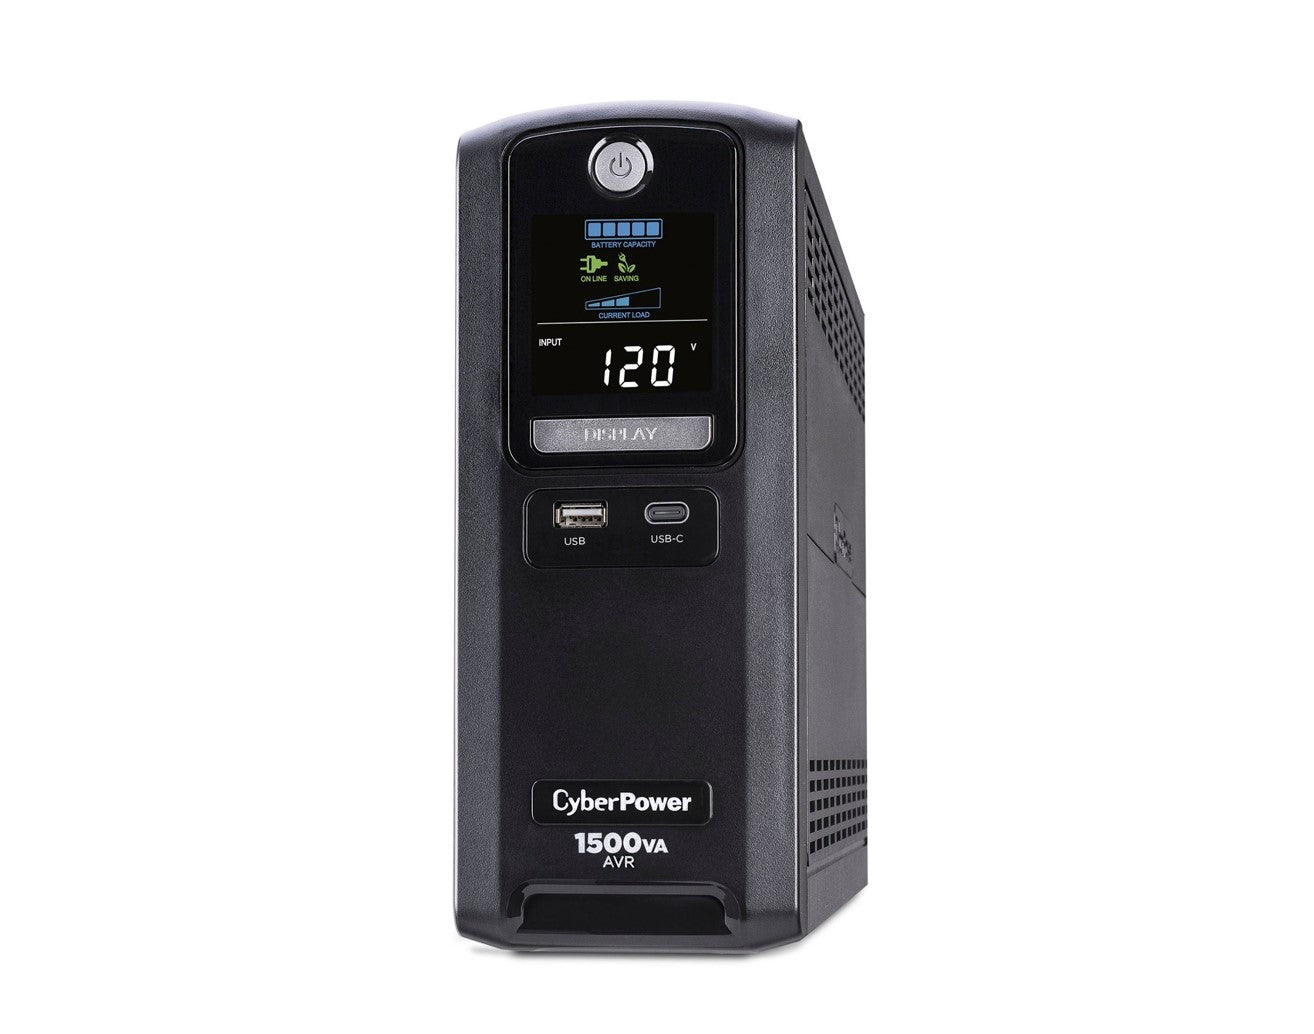 CyberPower LX1500GU3-R 1500VA / 900W 10 Outlets Battery Backup UPS - Certified Refurbished